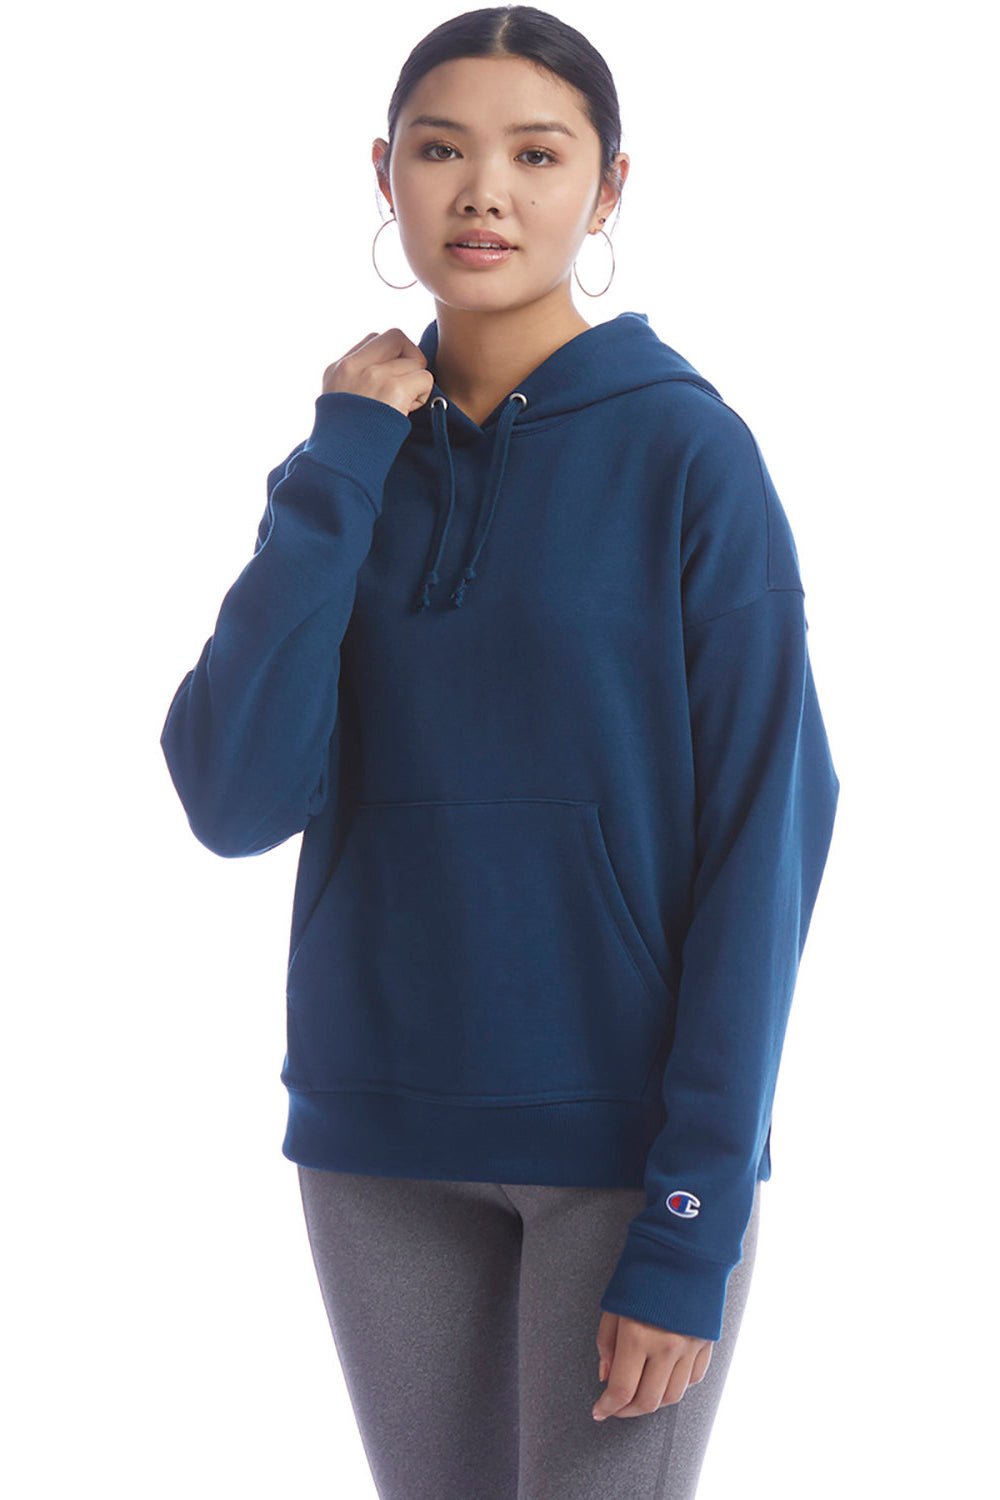 Champion S760 Womens Power blend Relaxed Hooded Sweatshirt Hoodie Late Night Blue 3Q